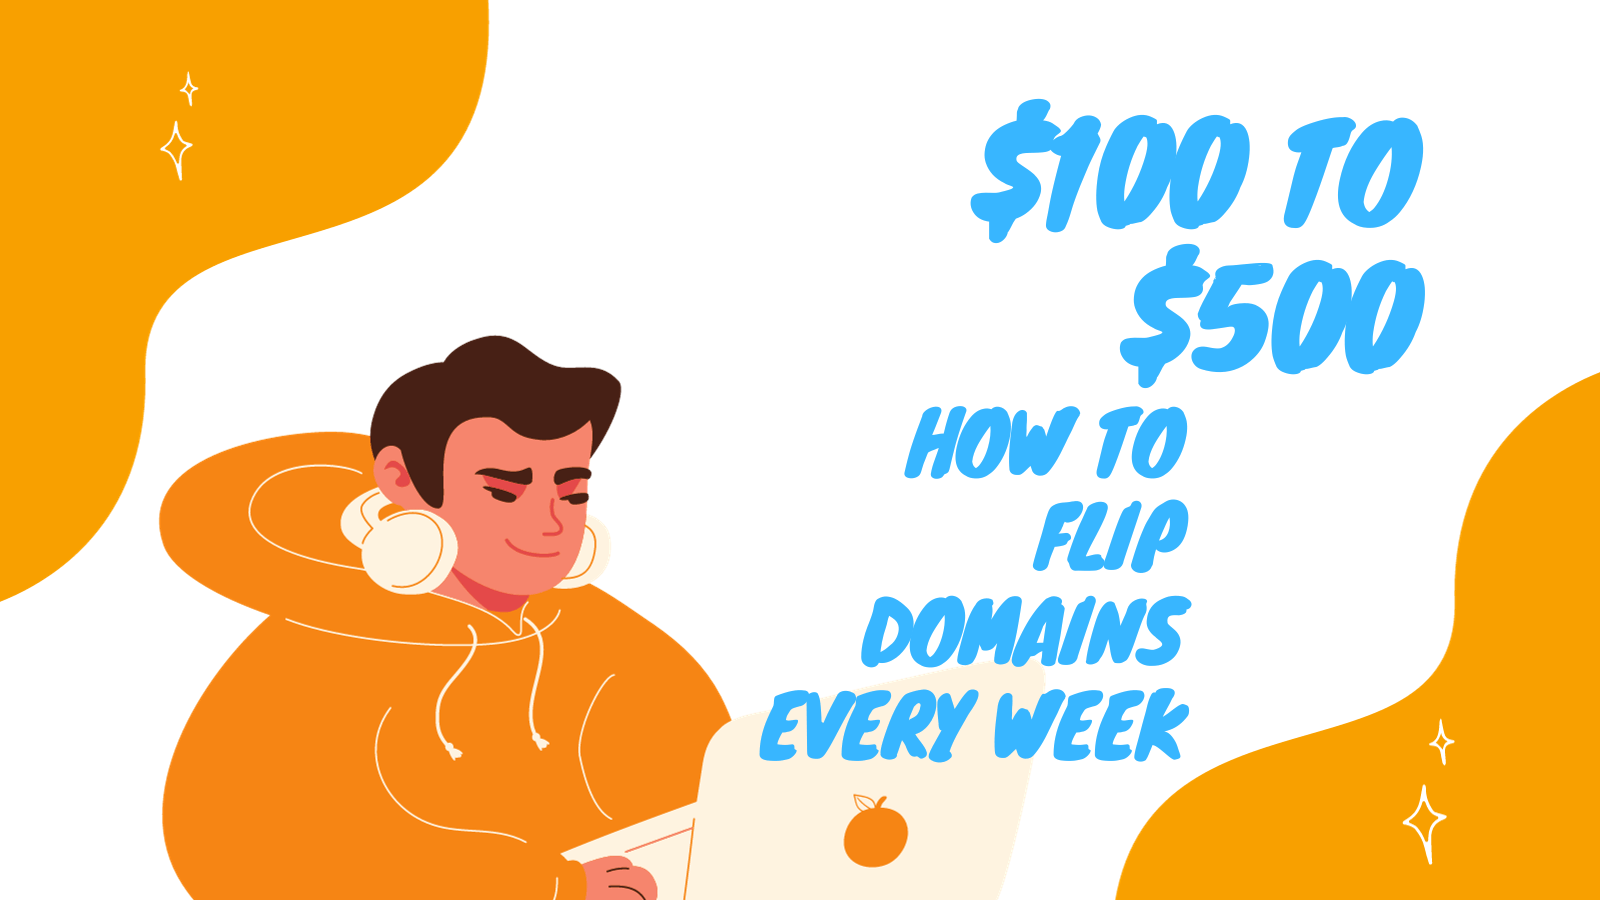 domain flipping weekly